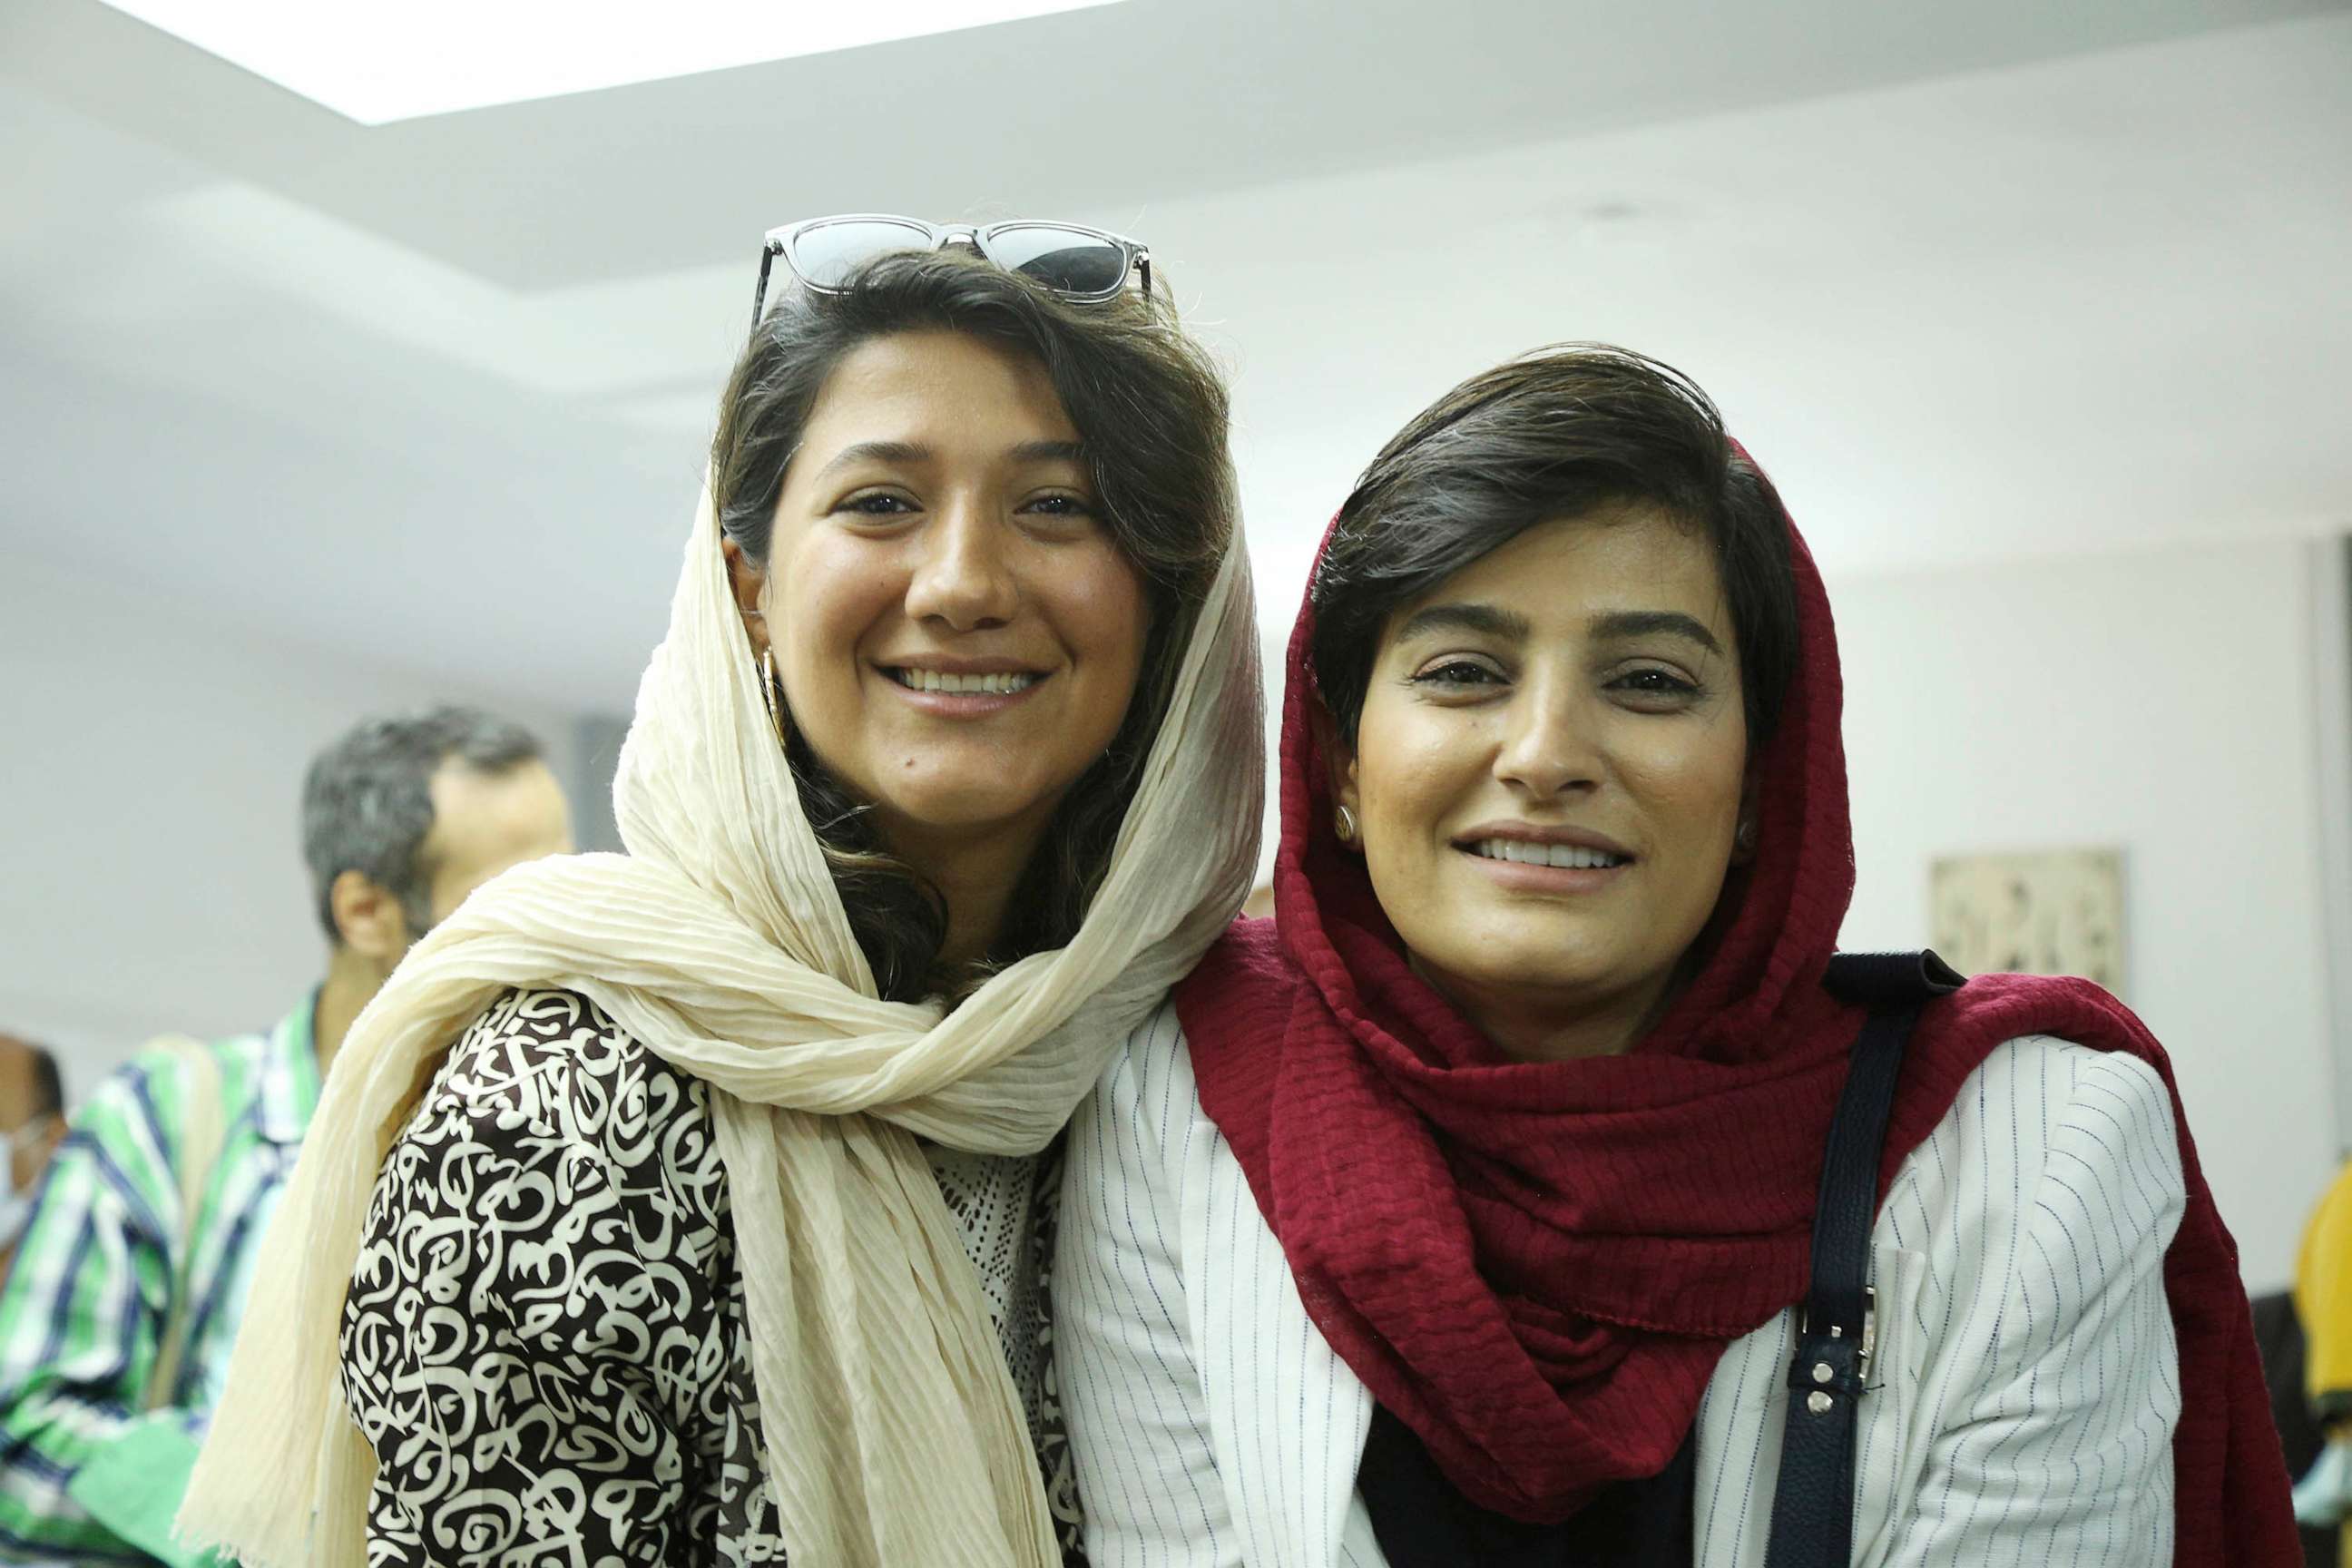 PHOTO: FILE - Journalists Nilufar Hamedi, left, and Elaheh Mohammadi. The women were among the first to report on the death of Amini, a Kurdish woman, which sparked a massive wave of protest in Iran.